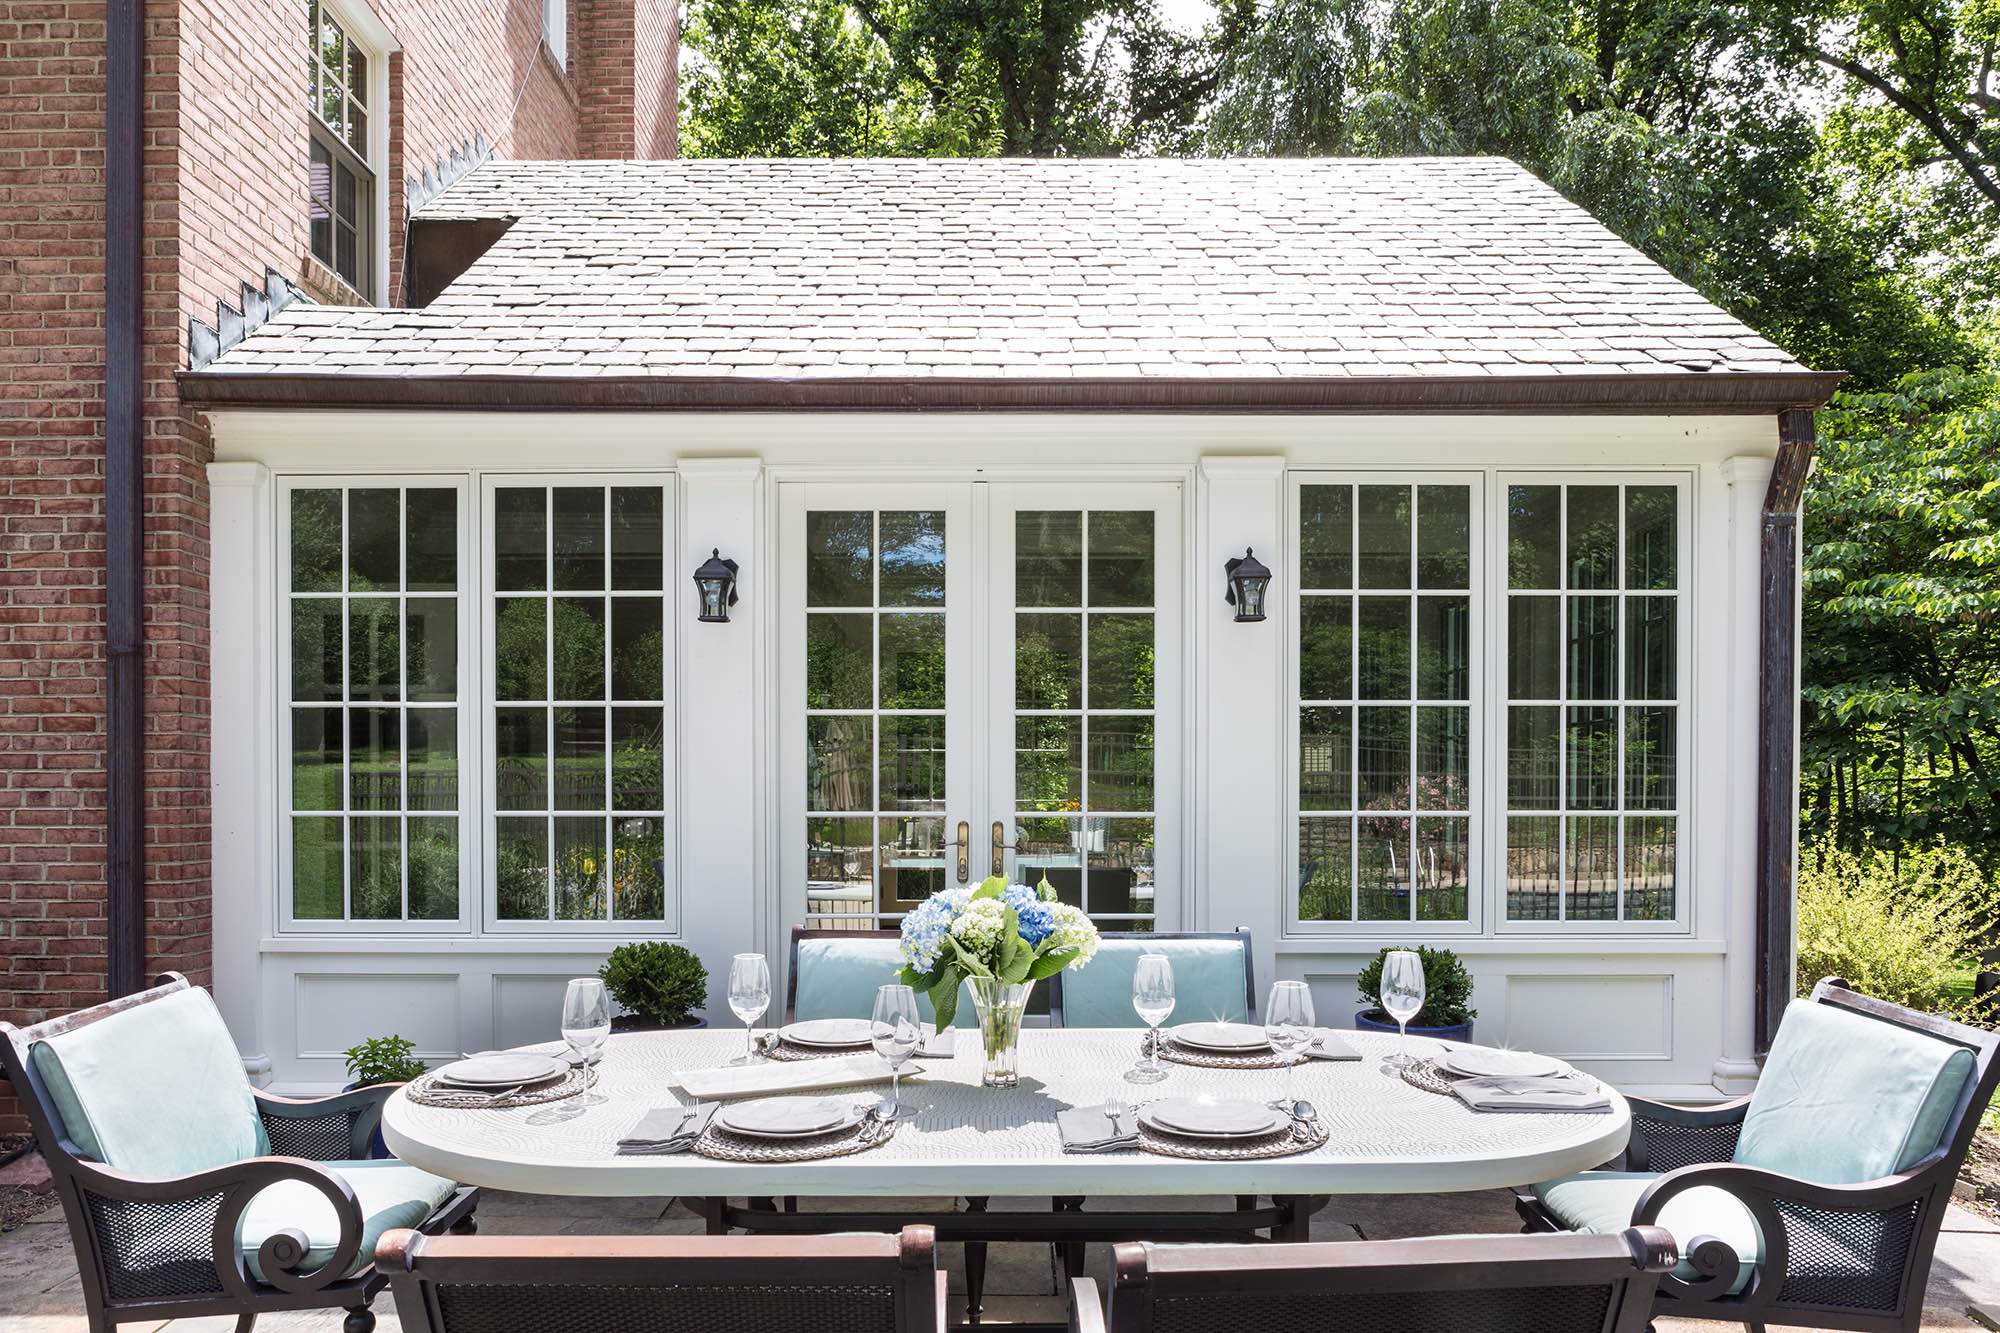 Dining table with bronze and celadon outdoor seating on sunny brick patio